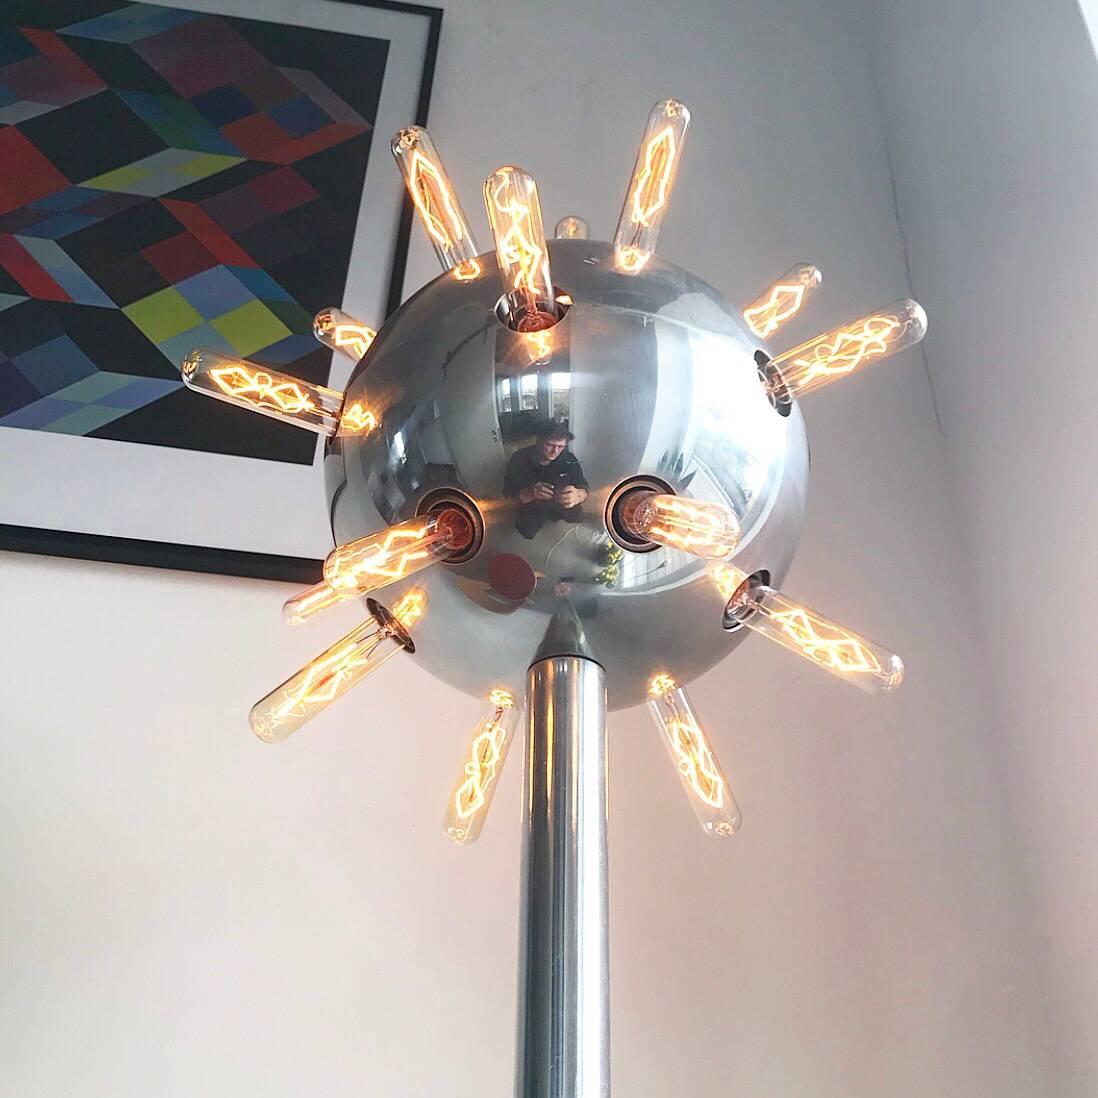 Sputnik Floor Lamp, late 1950s, Made by Temde Swiss/German Manufacturer In Excellent Condition For Sale In Haderslev, DK